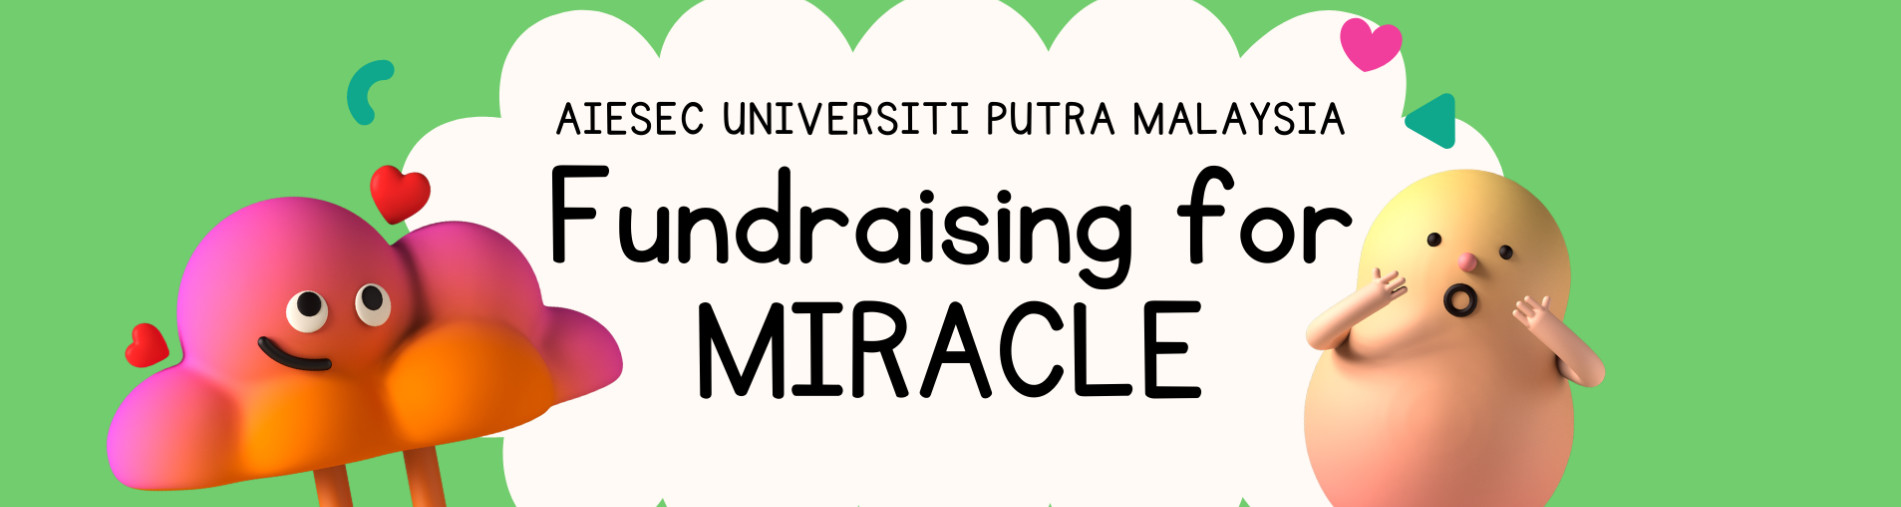 Fundraising for MIRACLE 